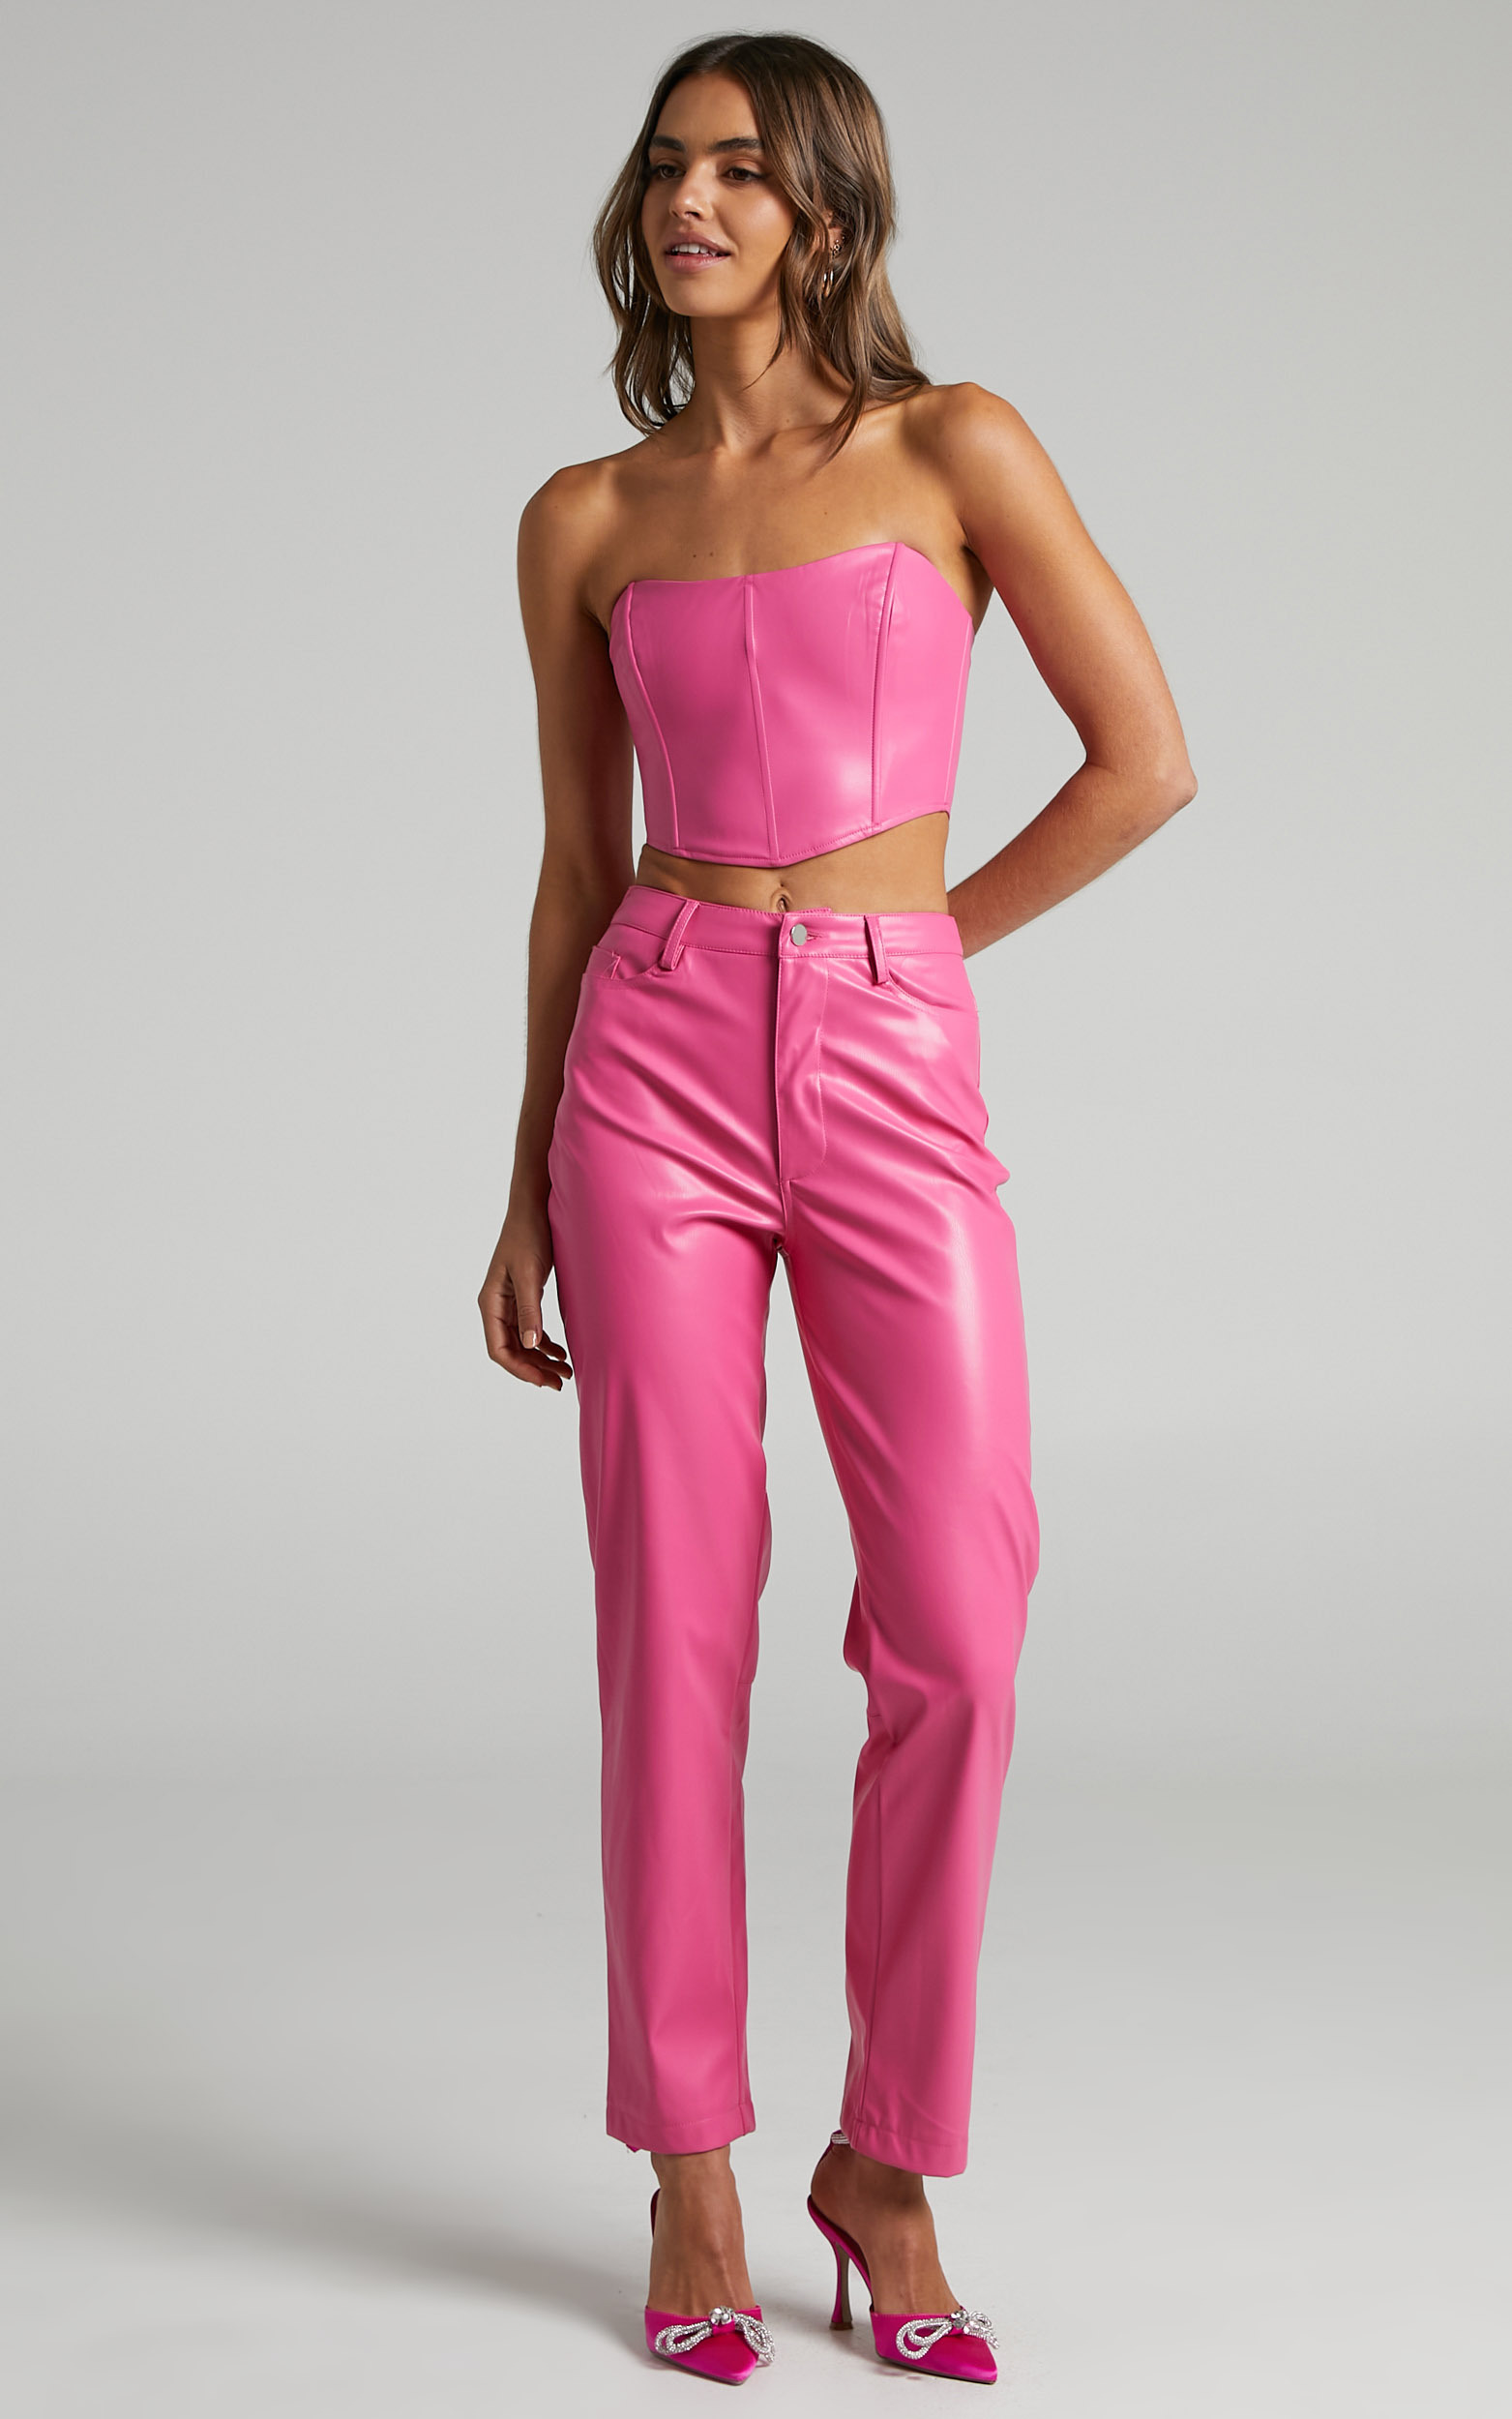 Lorrin Faux Leather Cropped Corset in Hot Pink - 04, PNK2, hi-res image number null